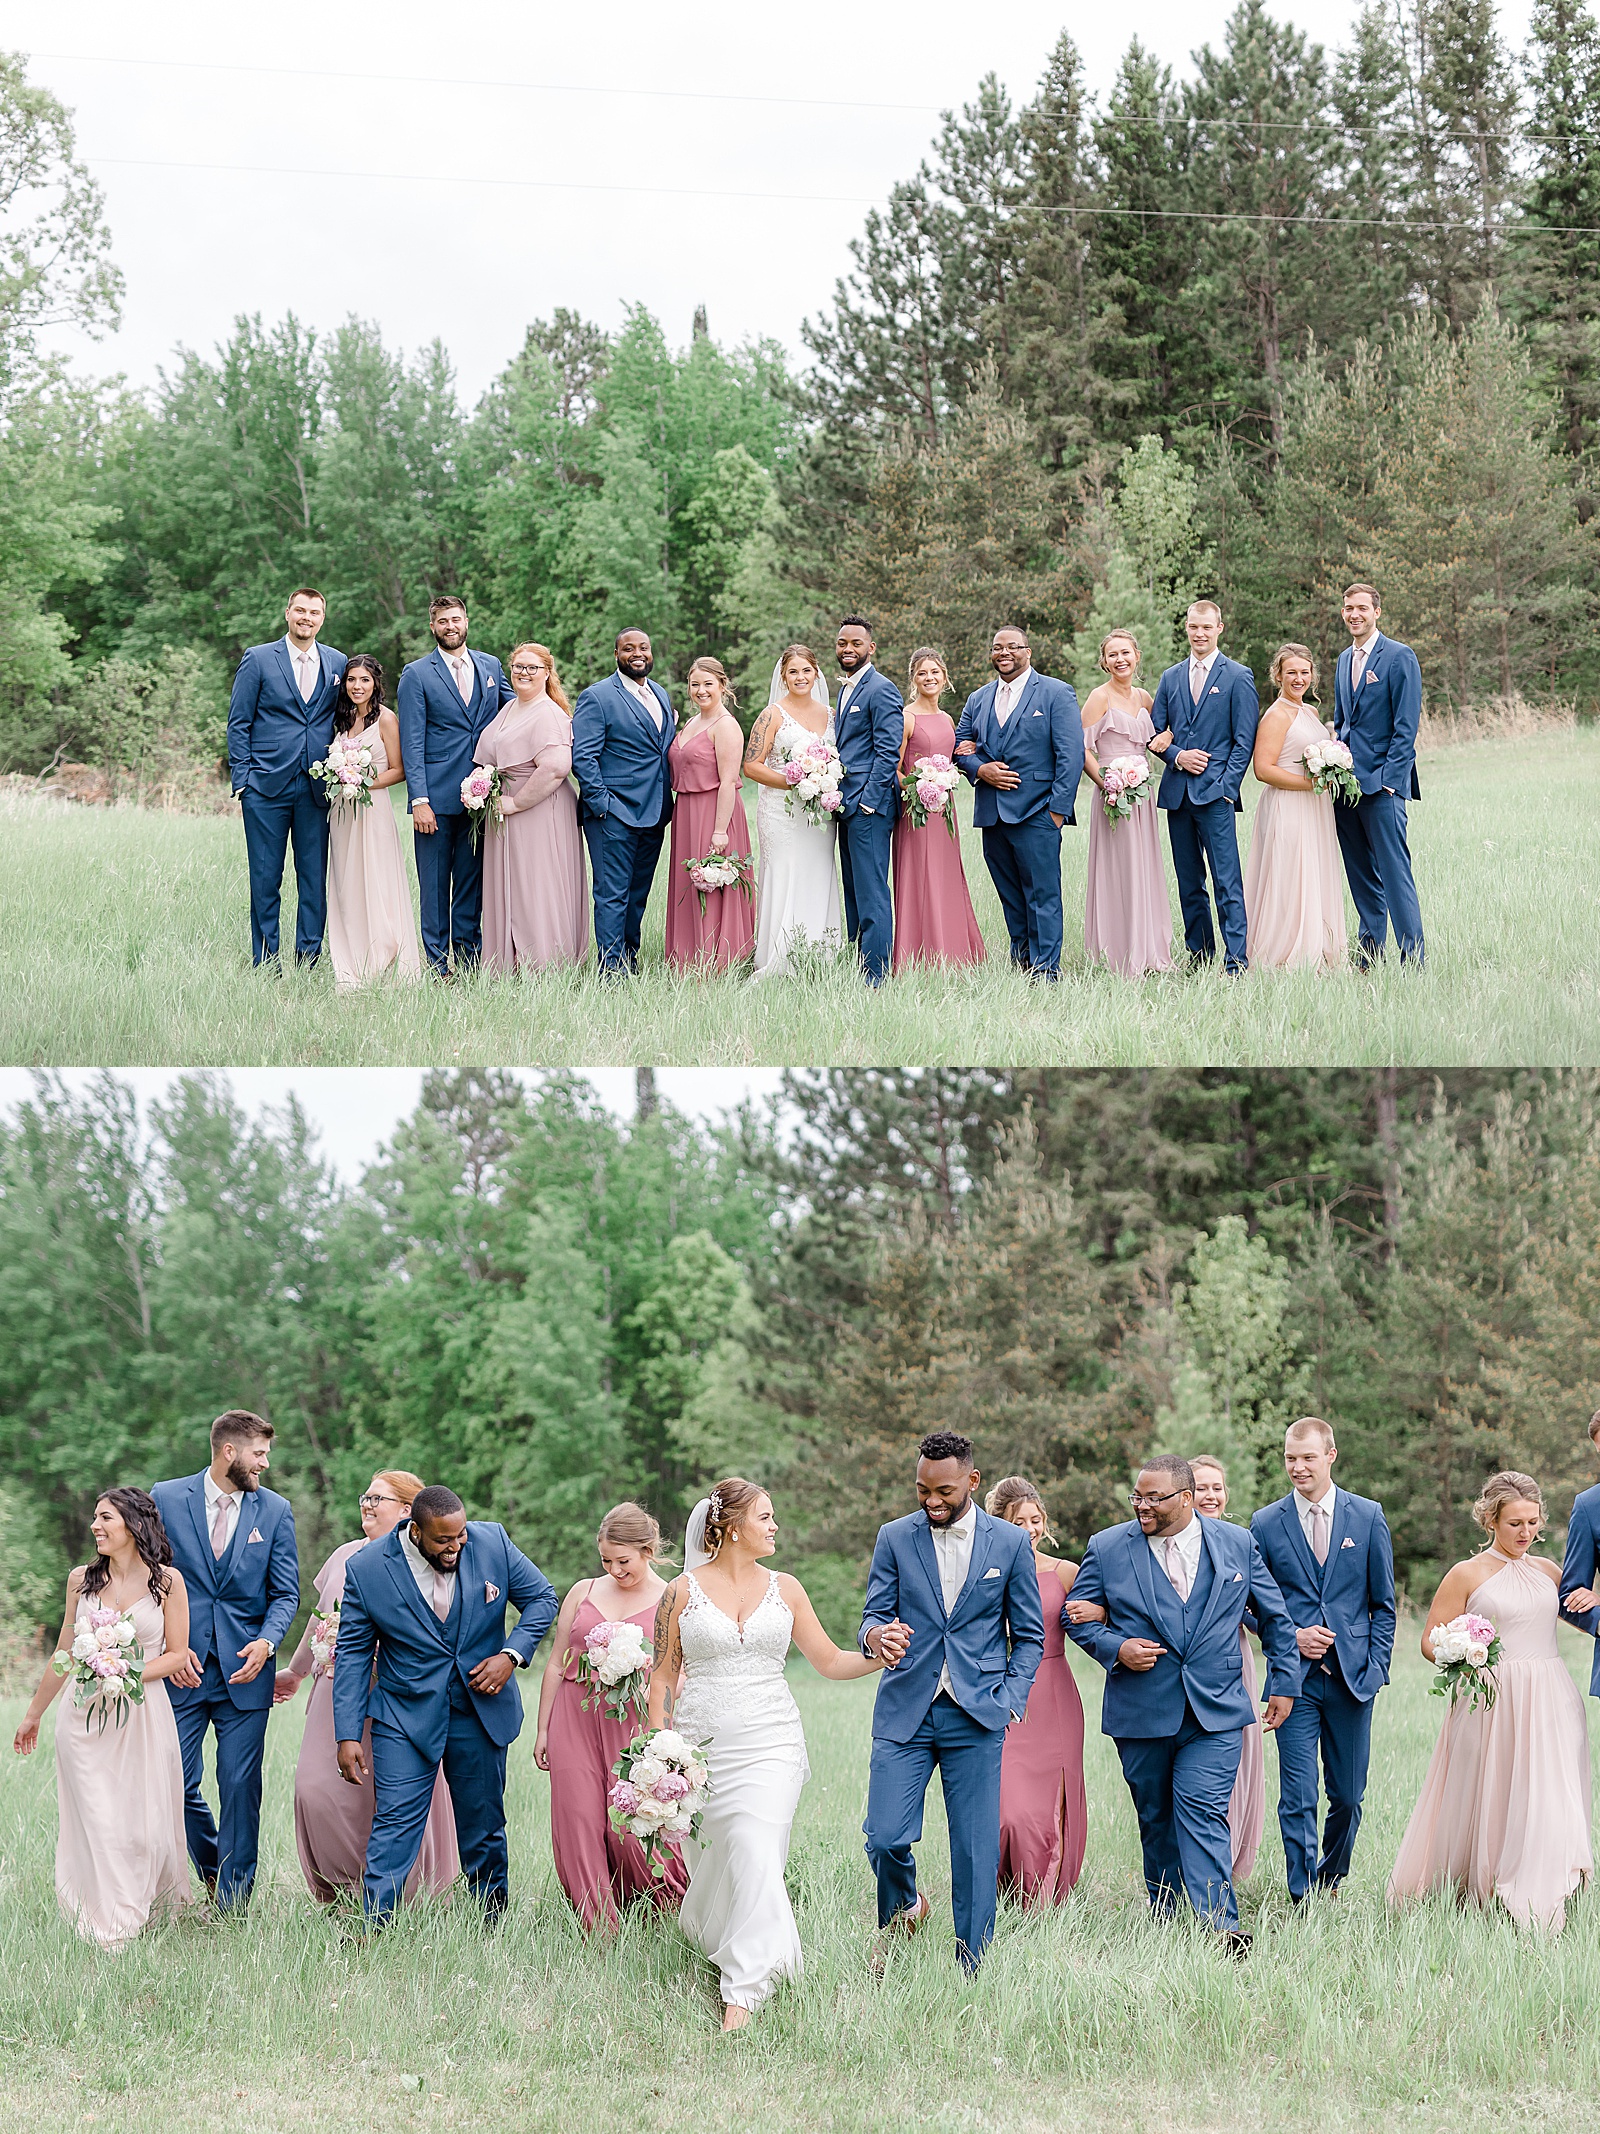 Large wedding party in navy suit & pink suit in a field 